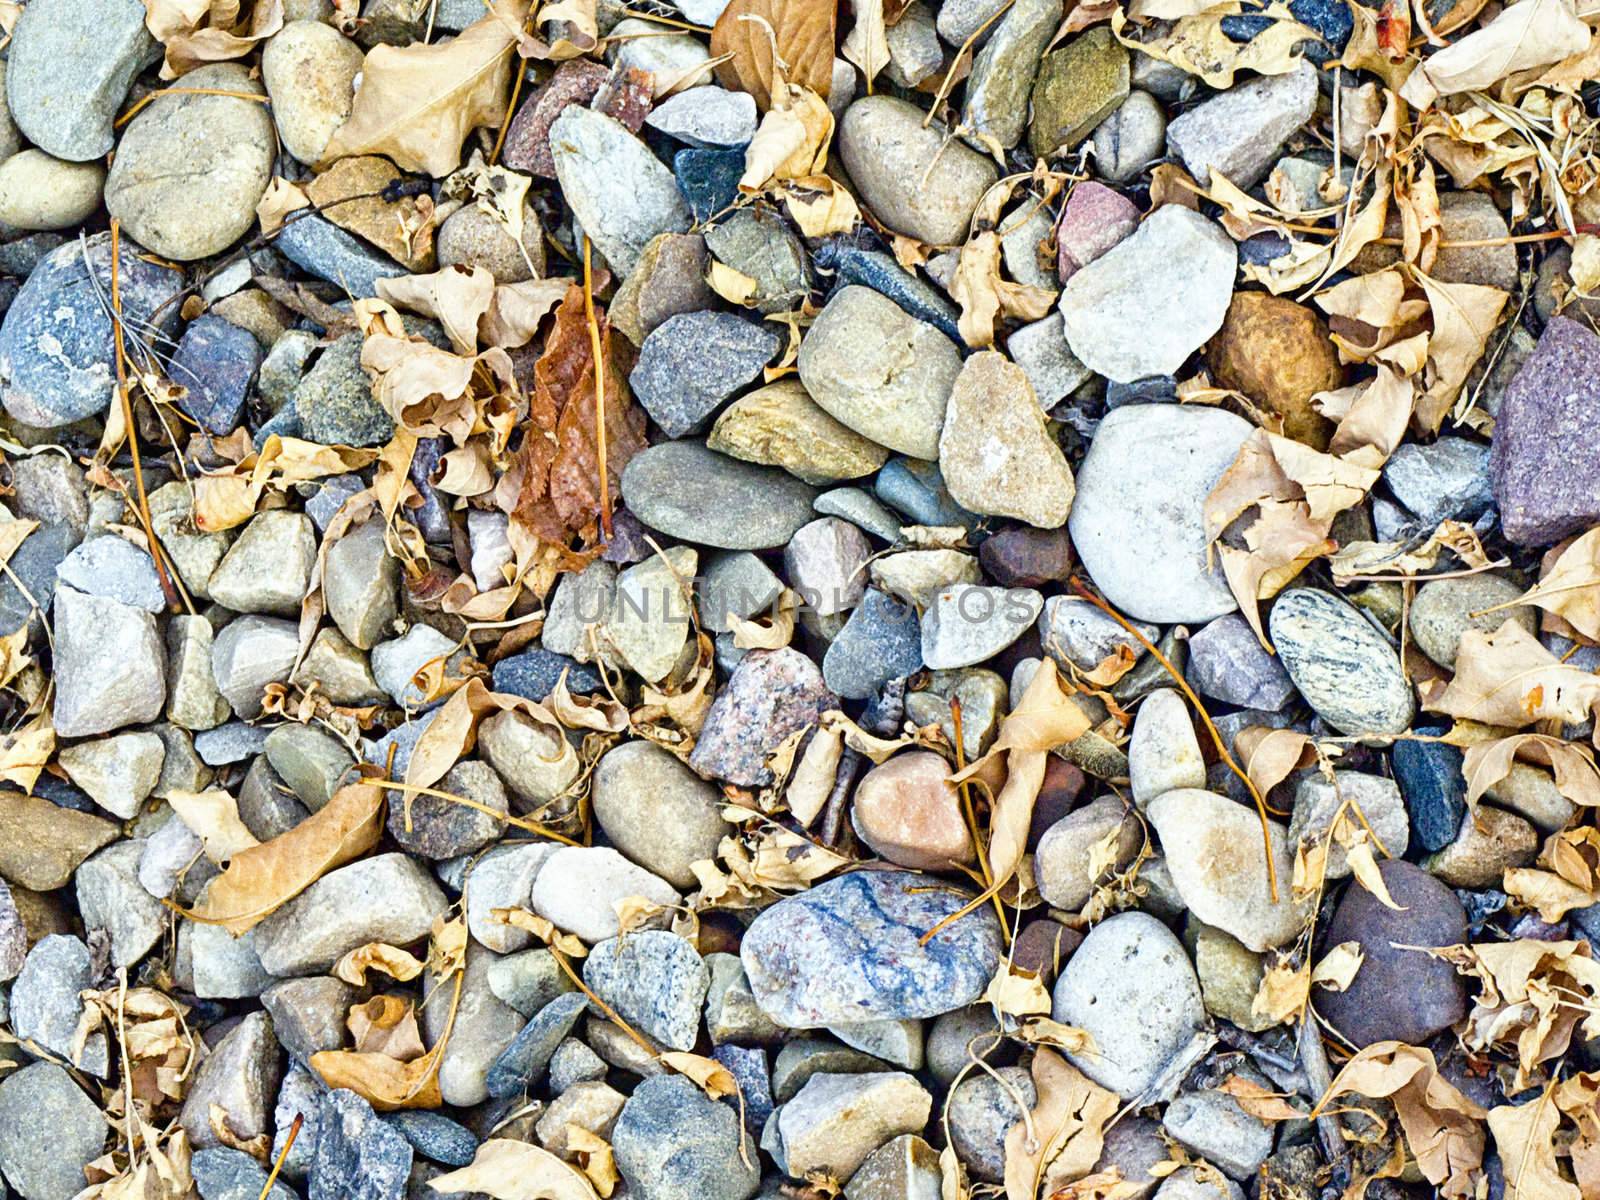 Rock bed and autumn leaves from a river bank